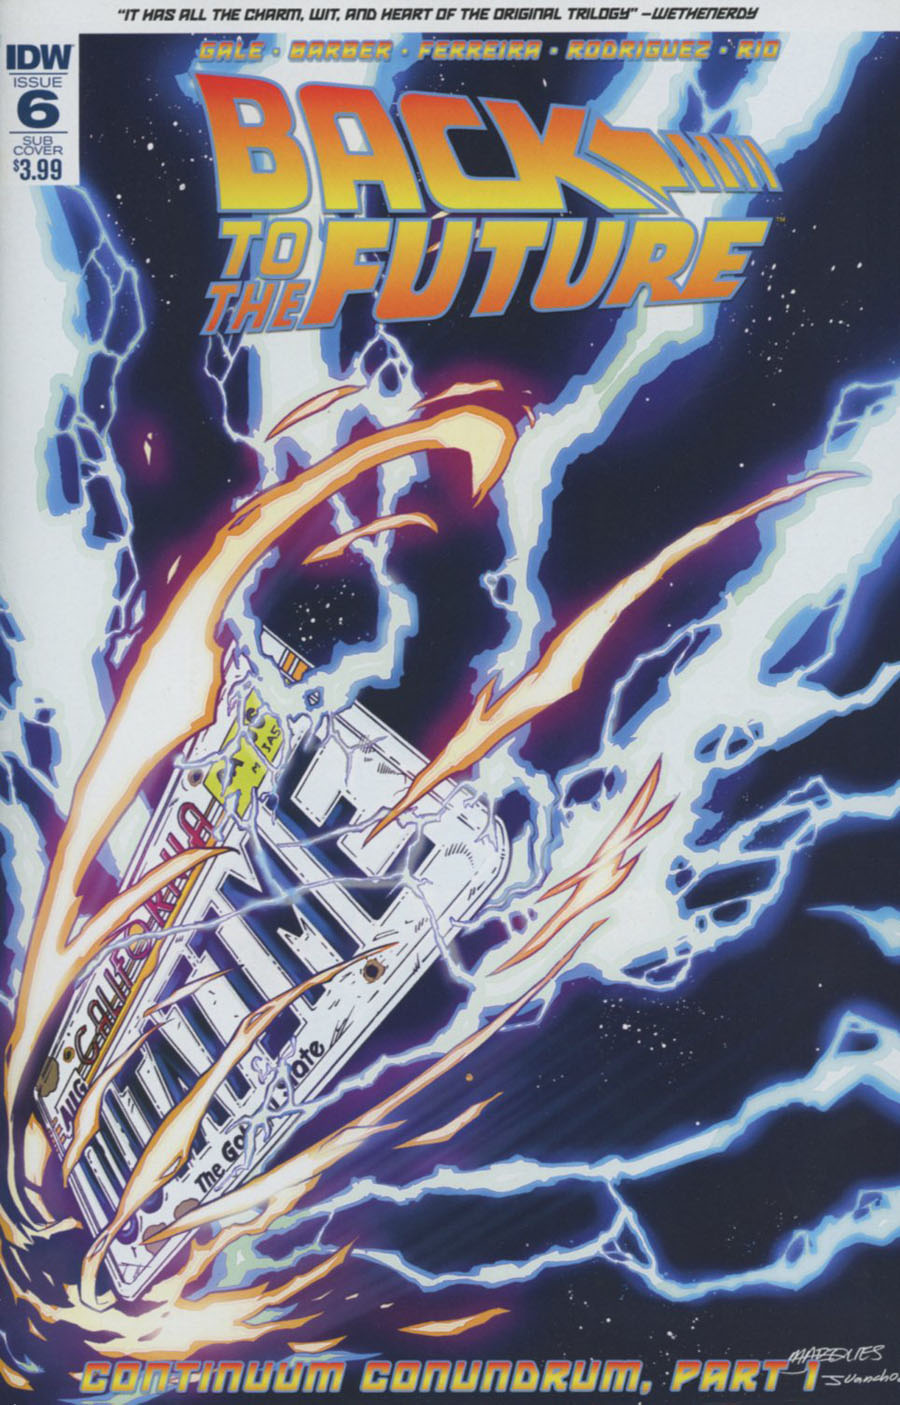 Back To The Future Vol 2 #6 Cover B Variant Anthony Marques Subscription Cover